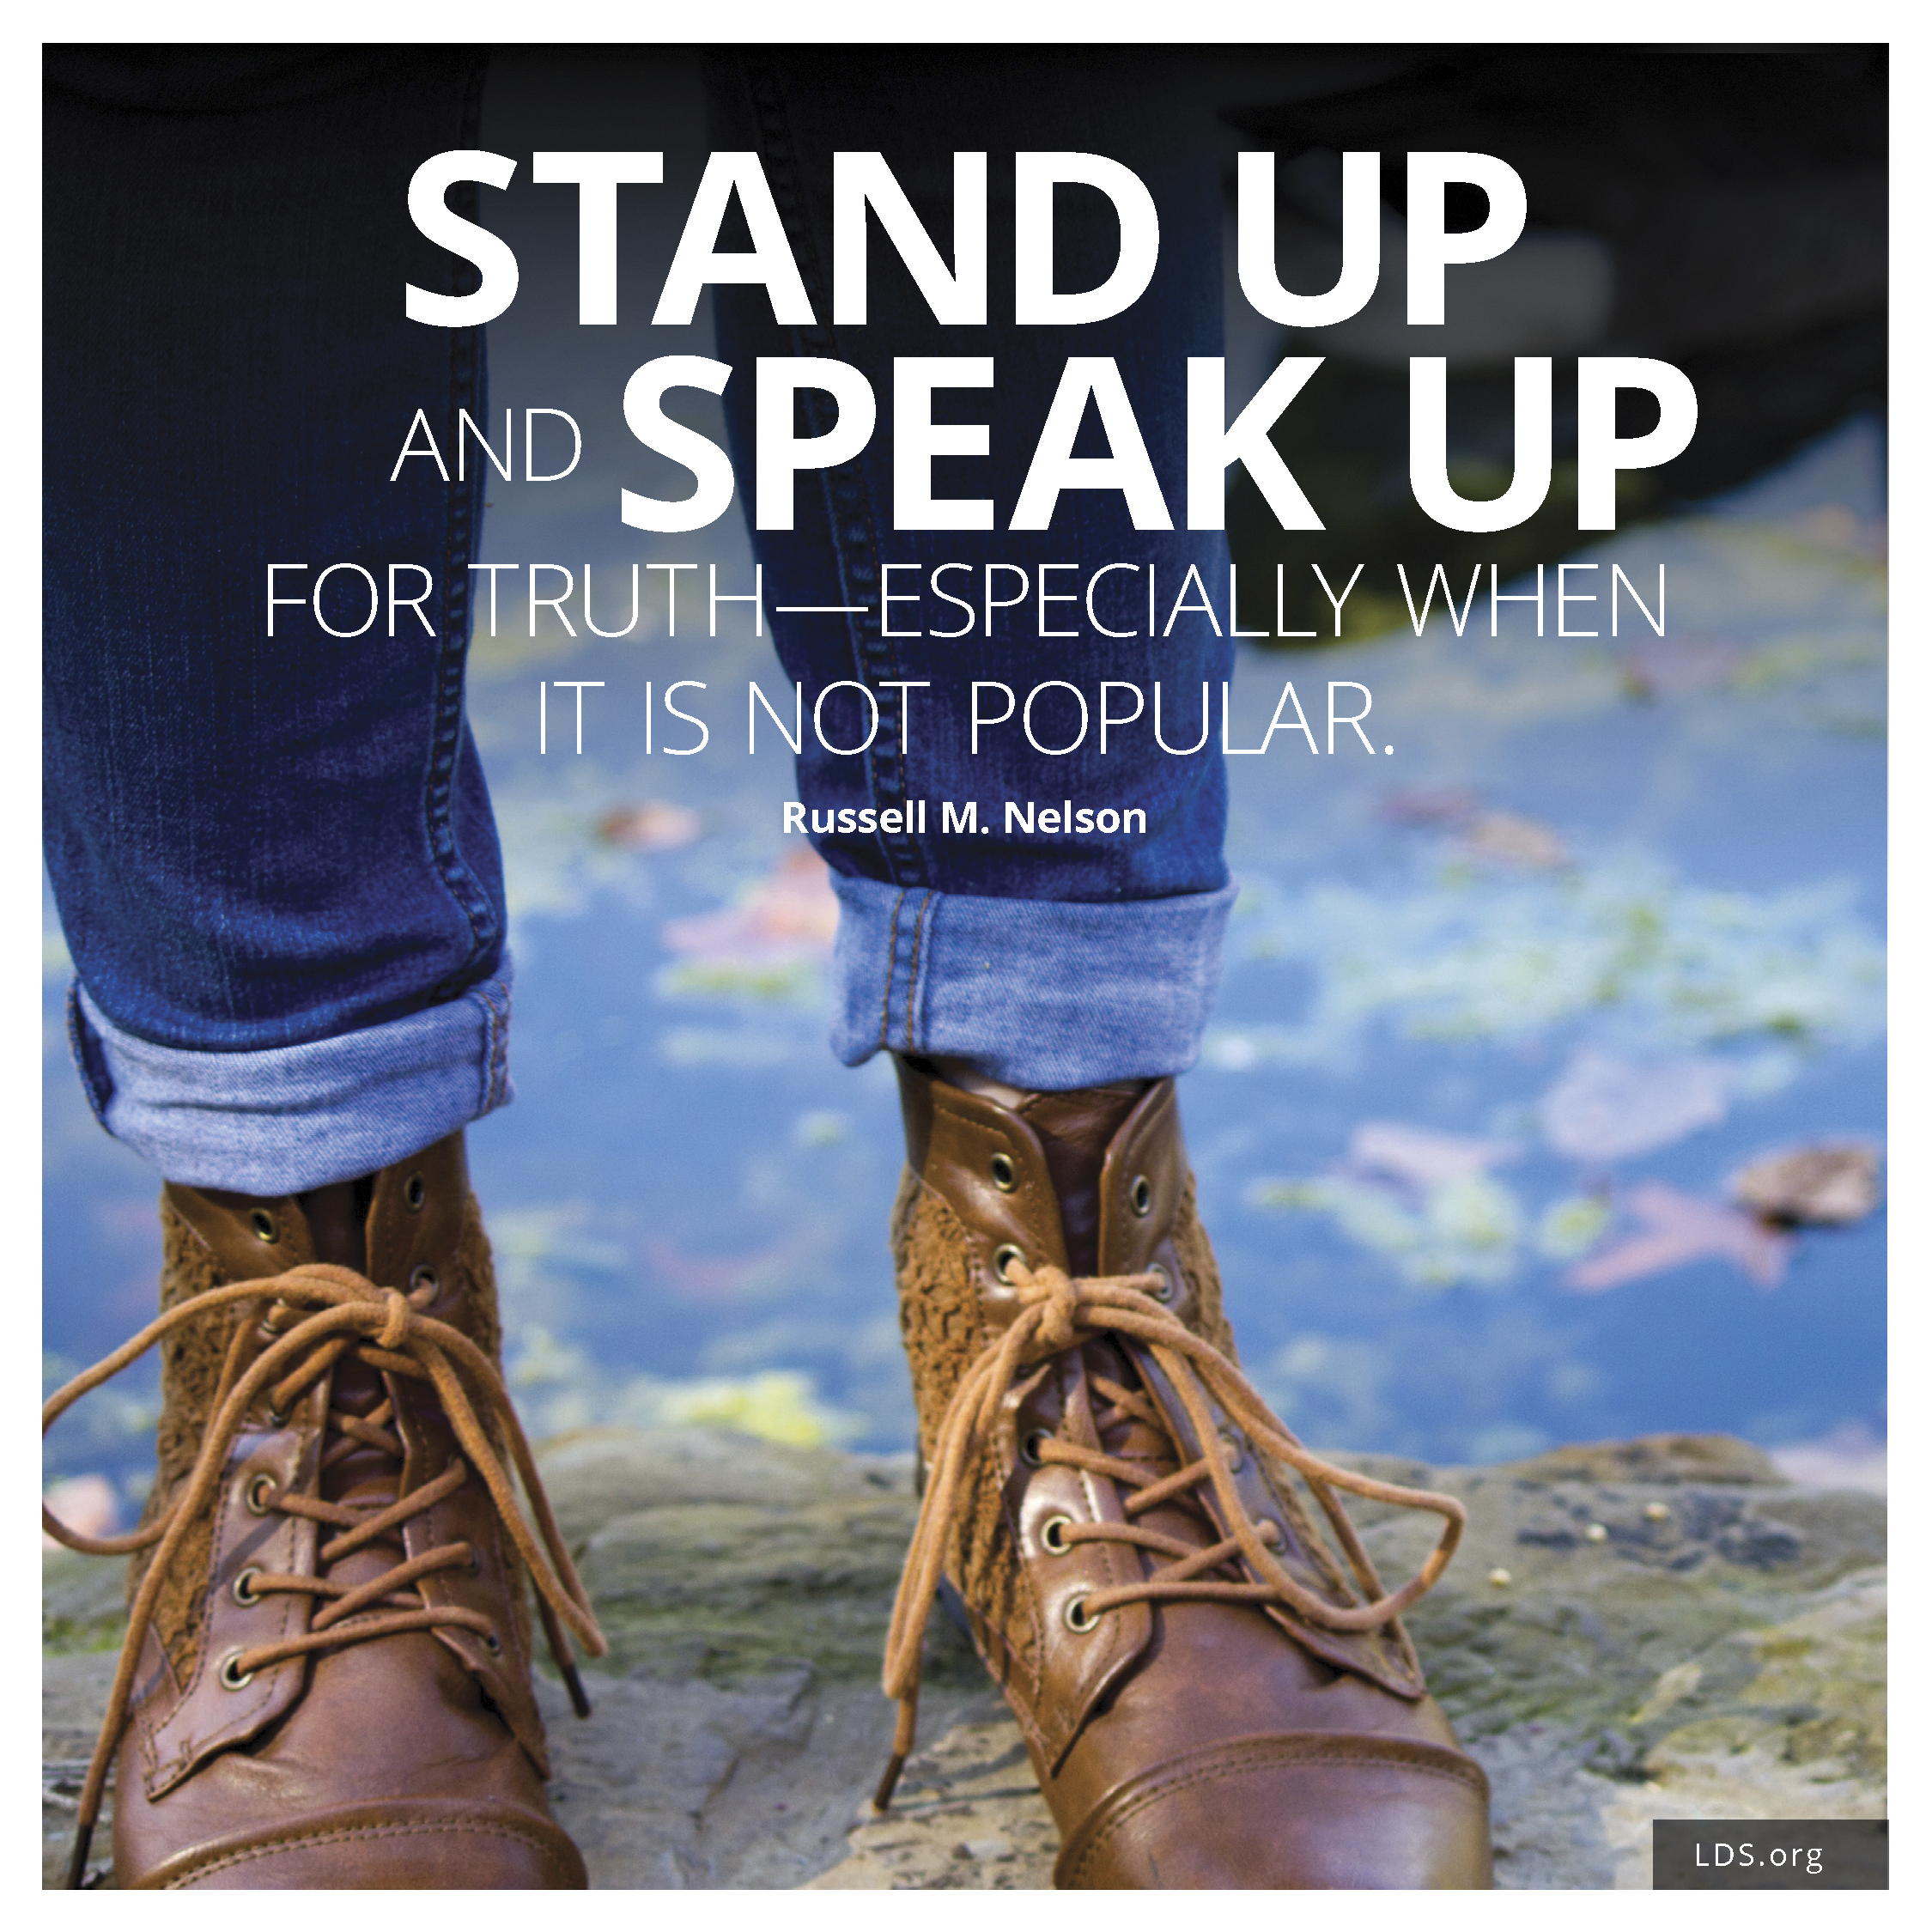 “Stand up and speak up for truth—especially when it is not popular.” —President Russell M. Nelson, “Becoming True Millennials”